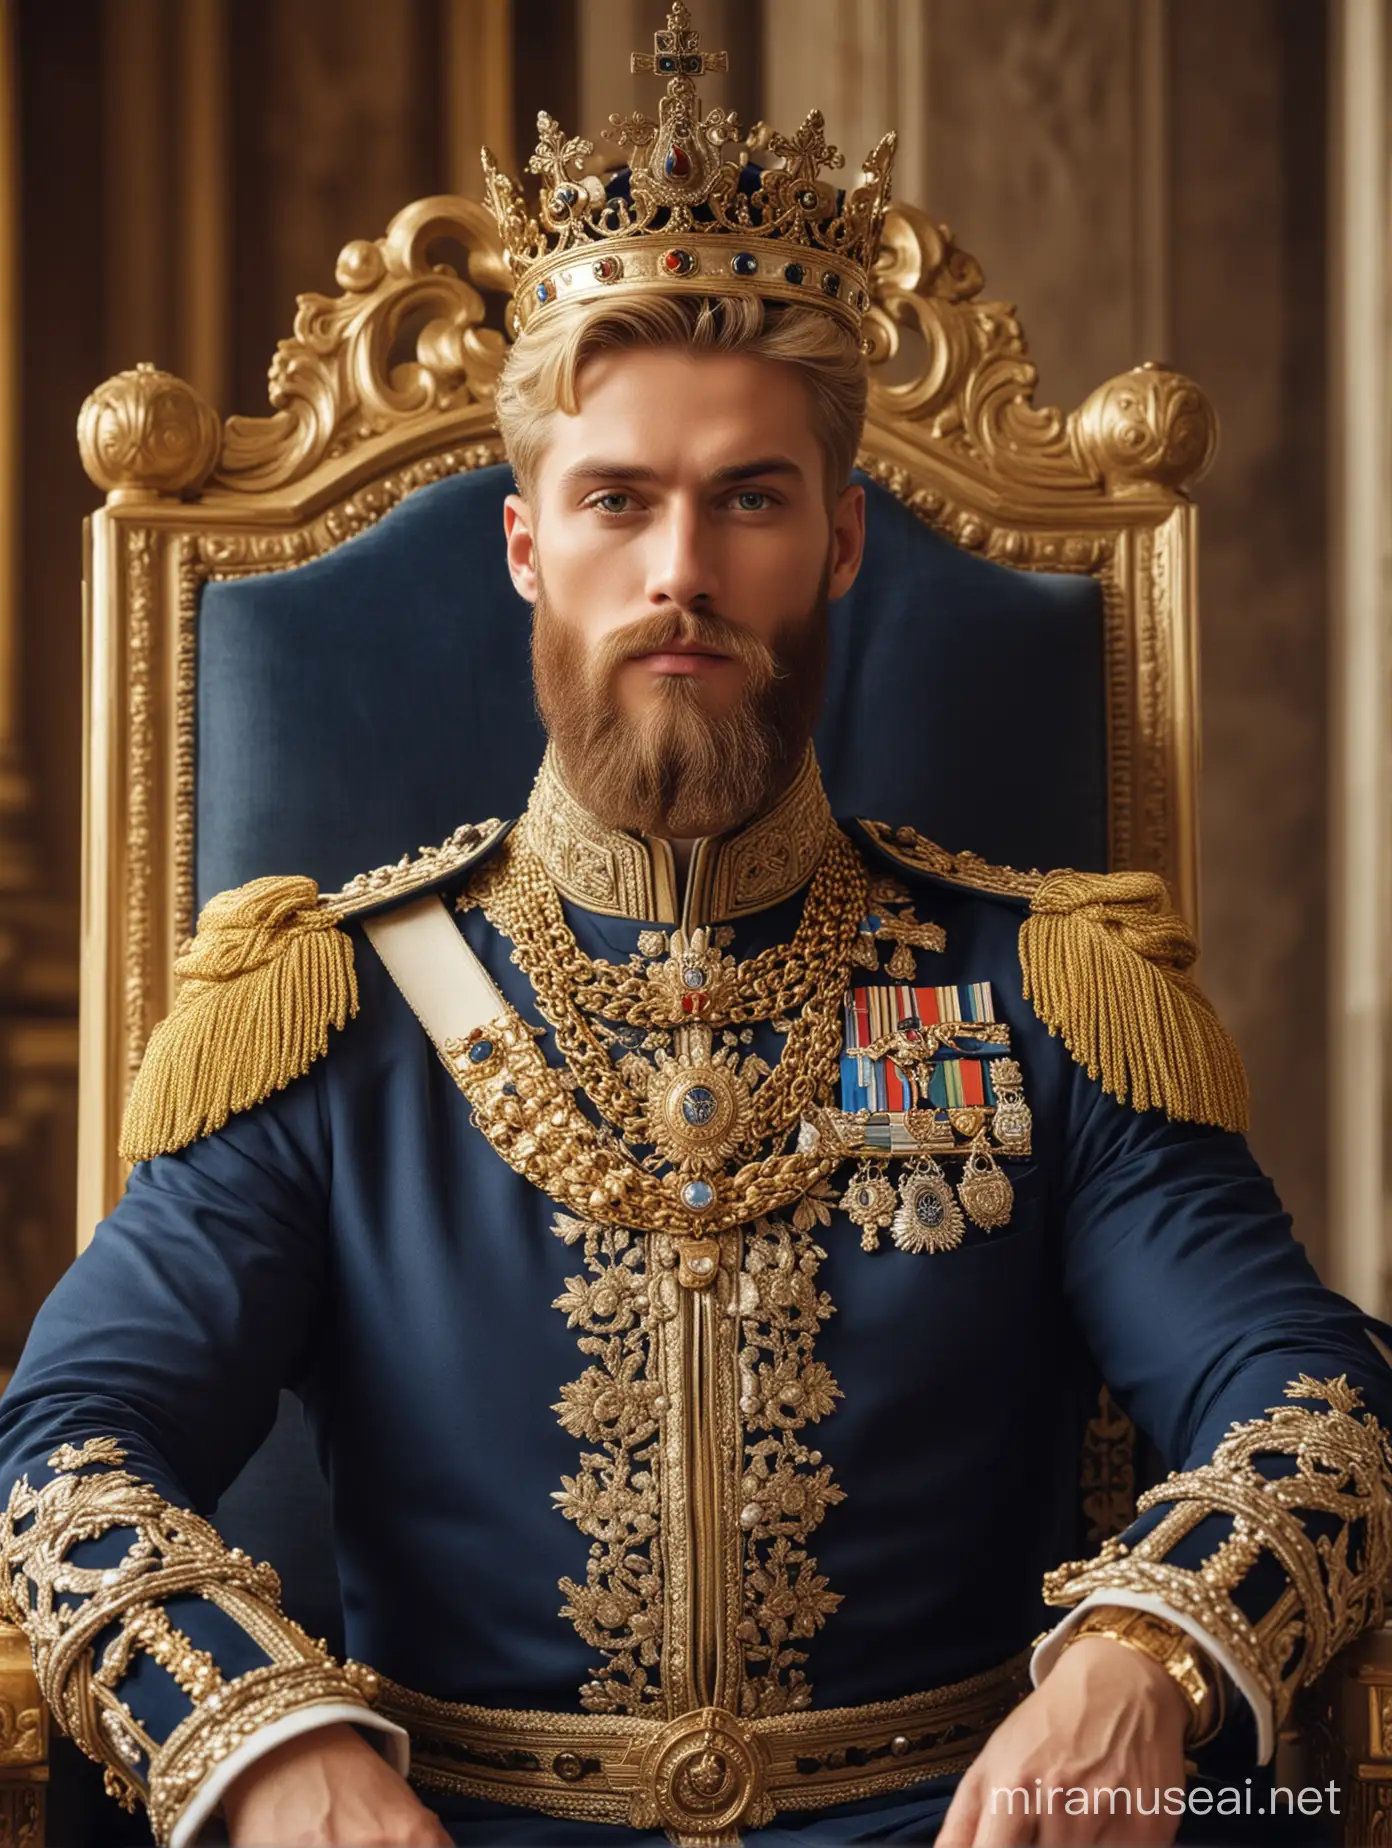 Regal Blonde King Seated on Ornate Throne in Royal Palace